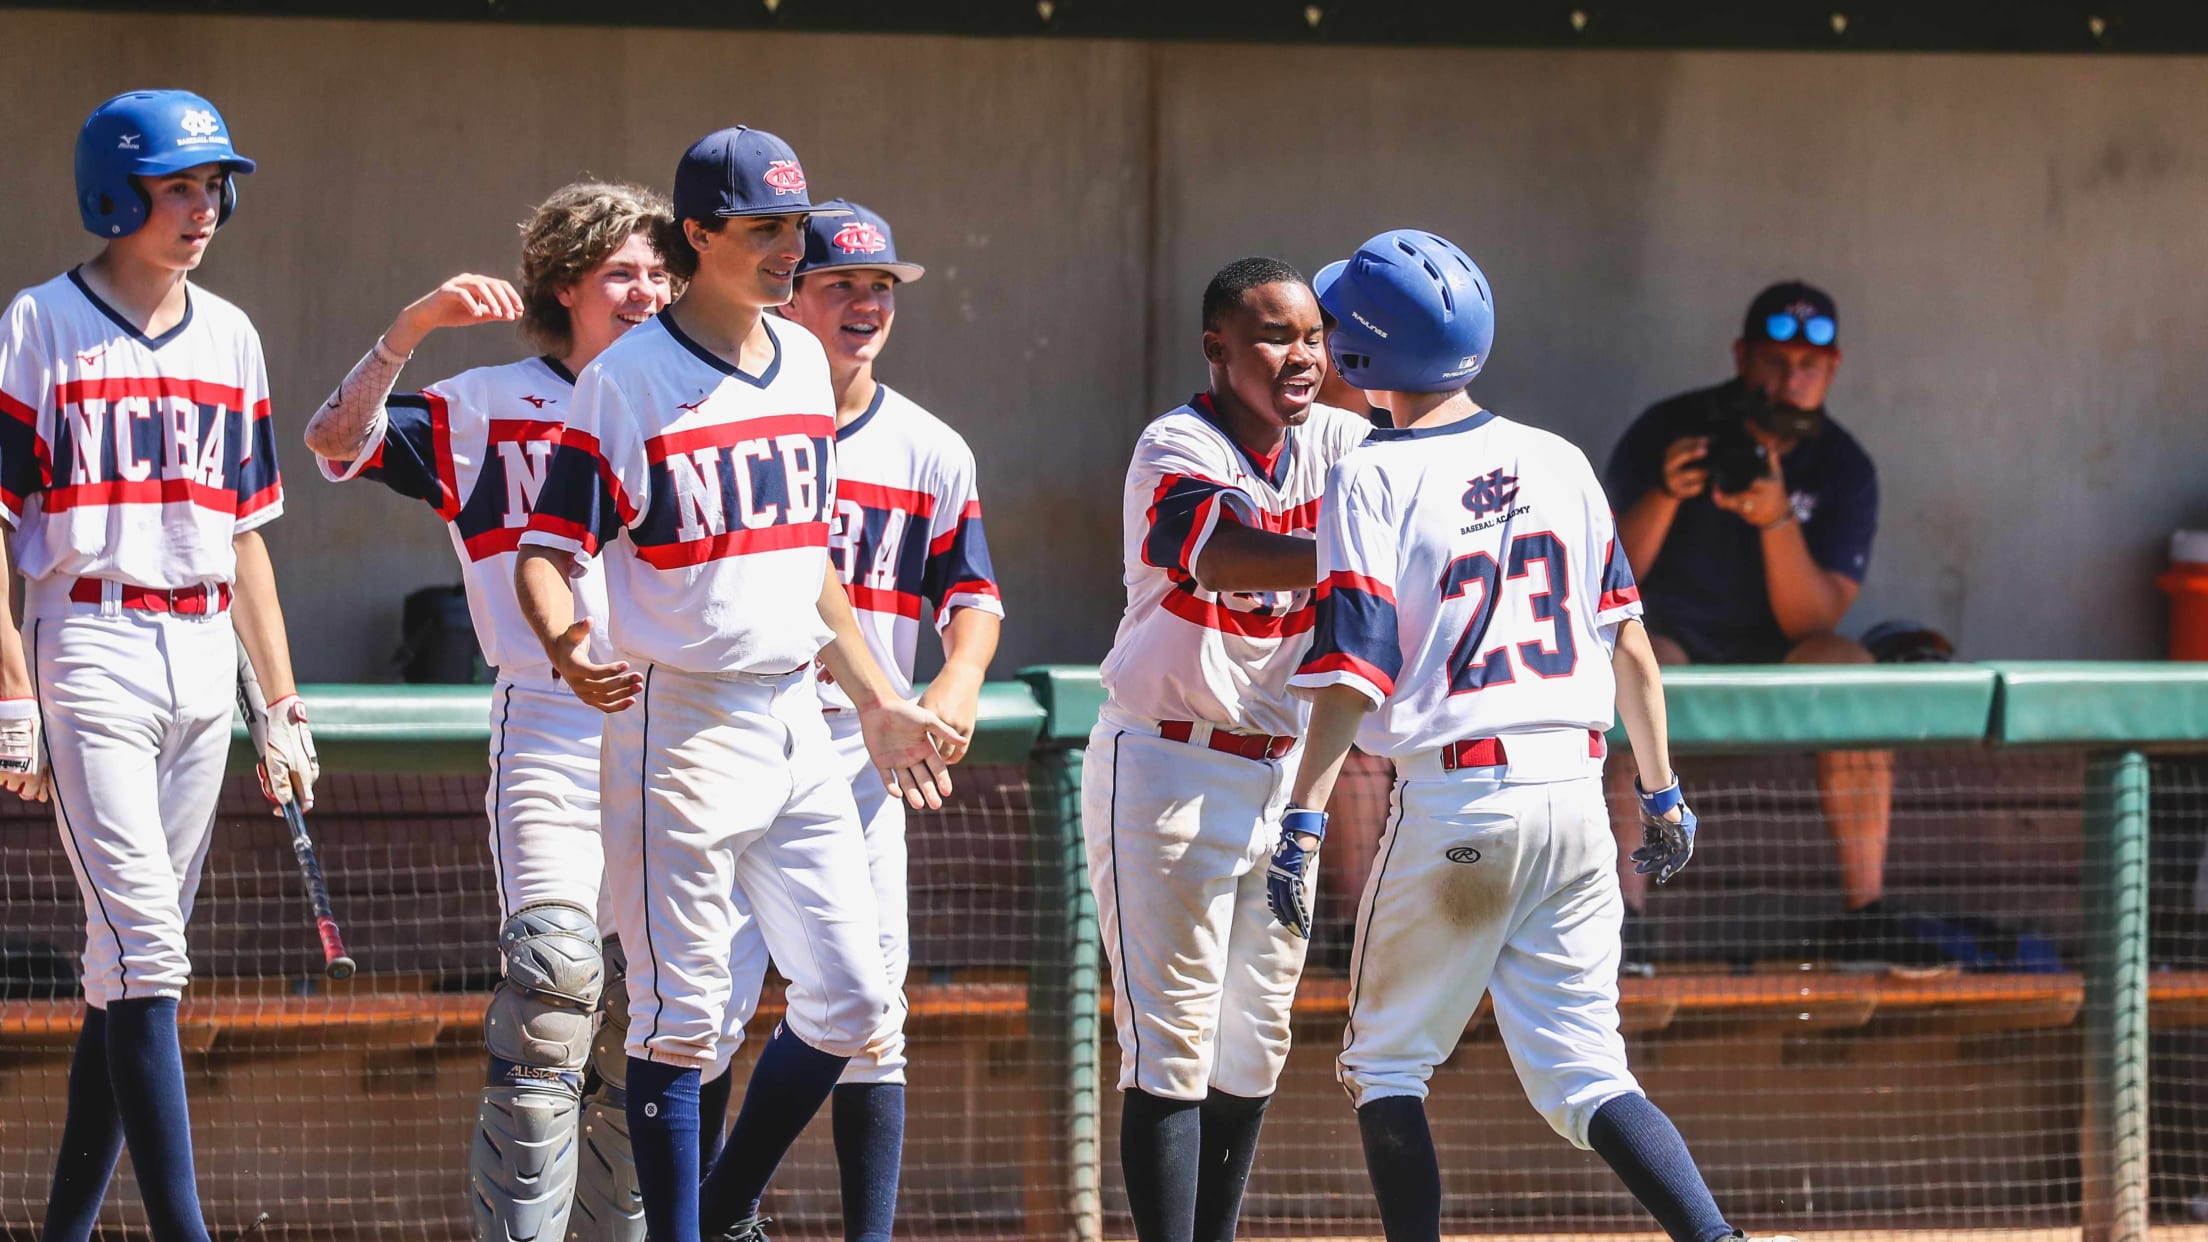 NC Baseball Academy Red Sox Defeat East Coast Clippers, Headed to Gold